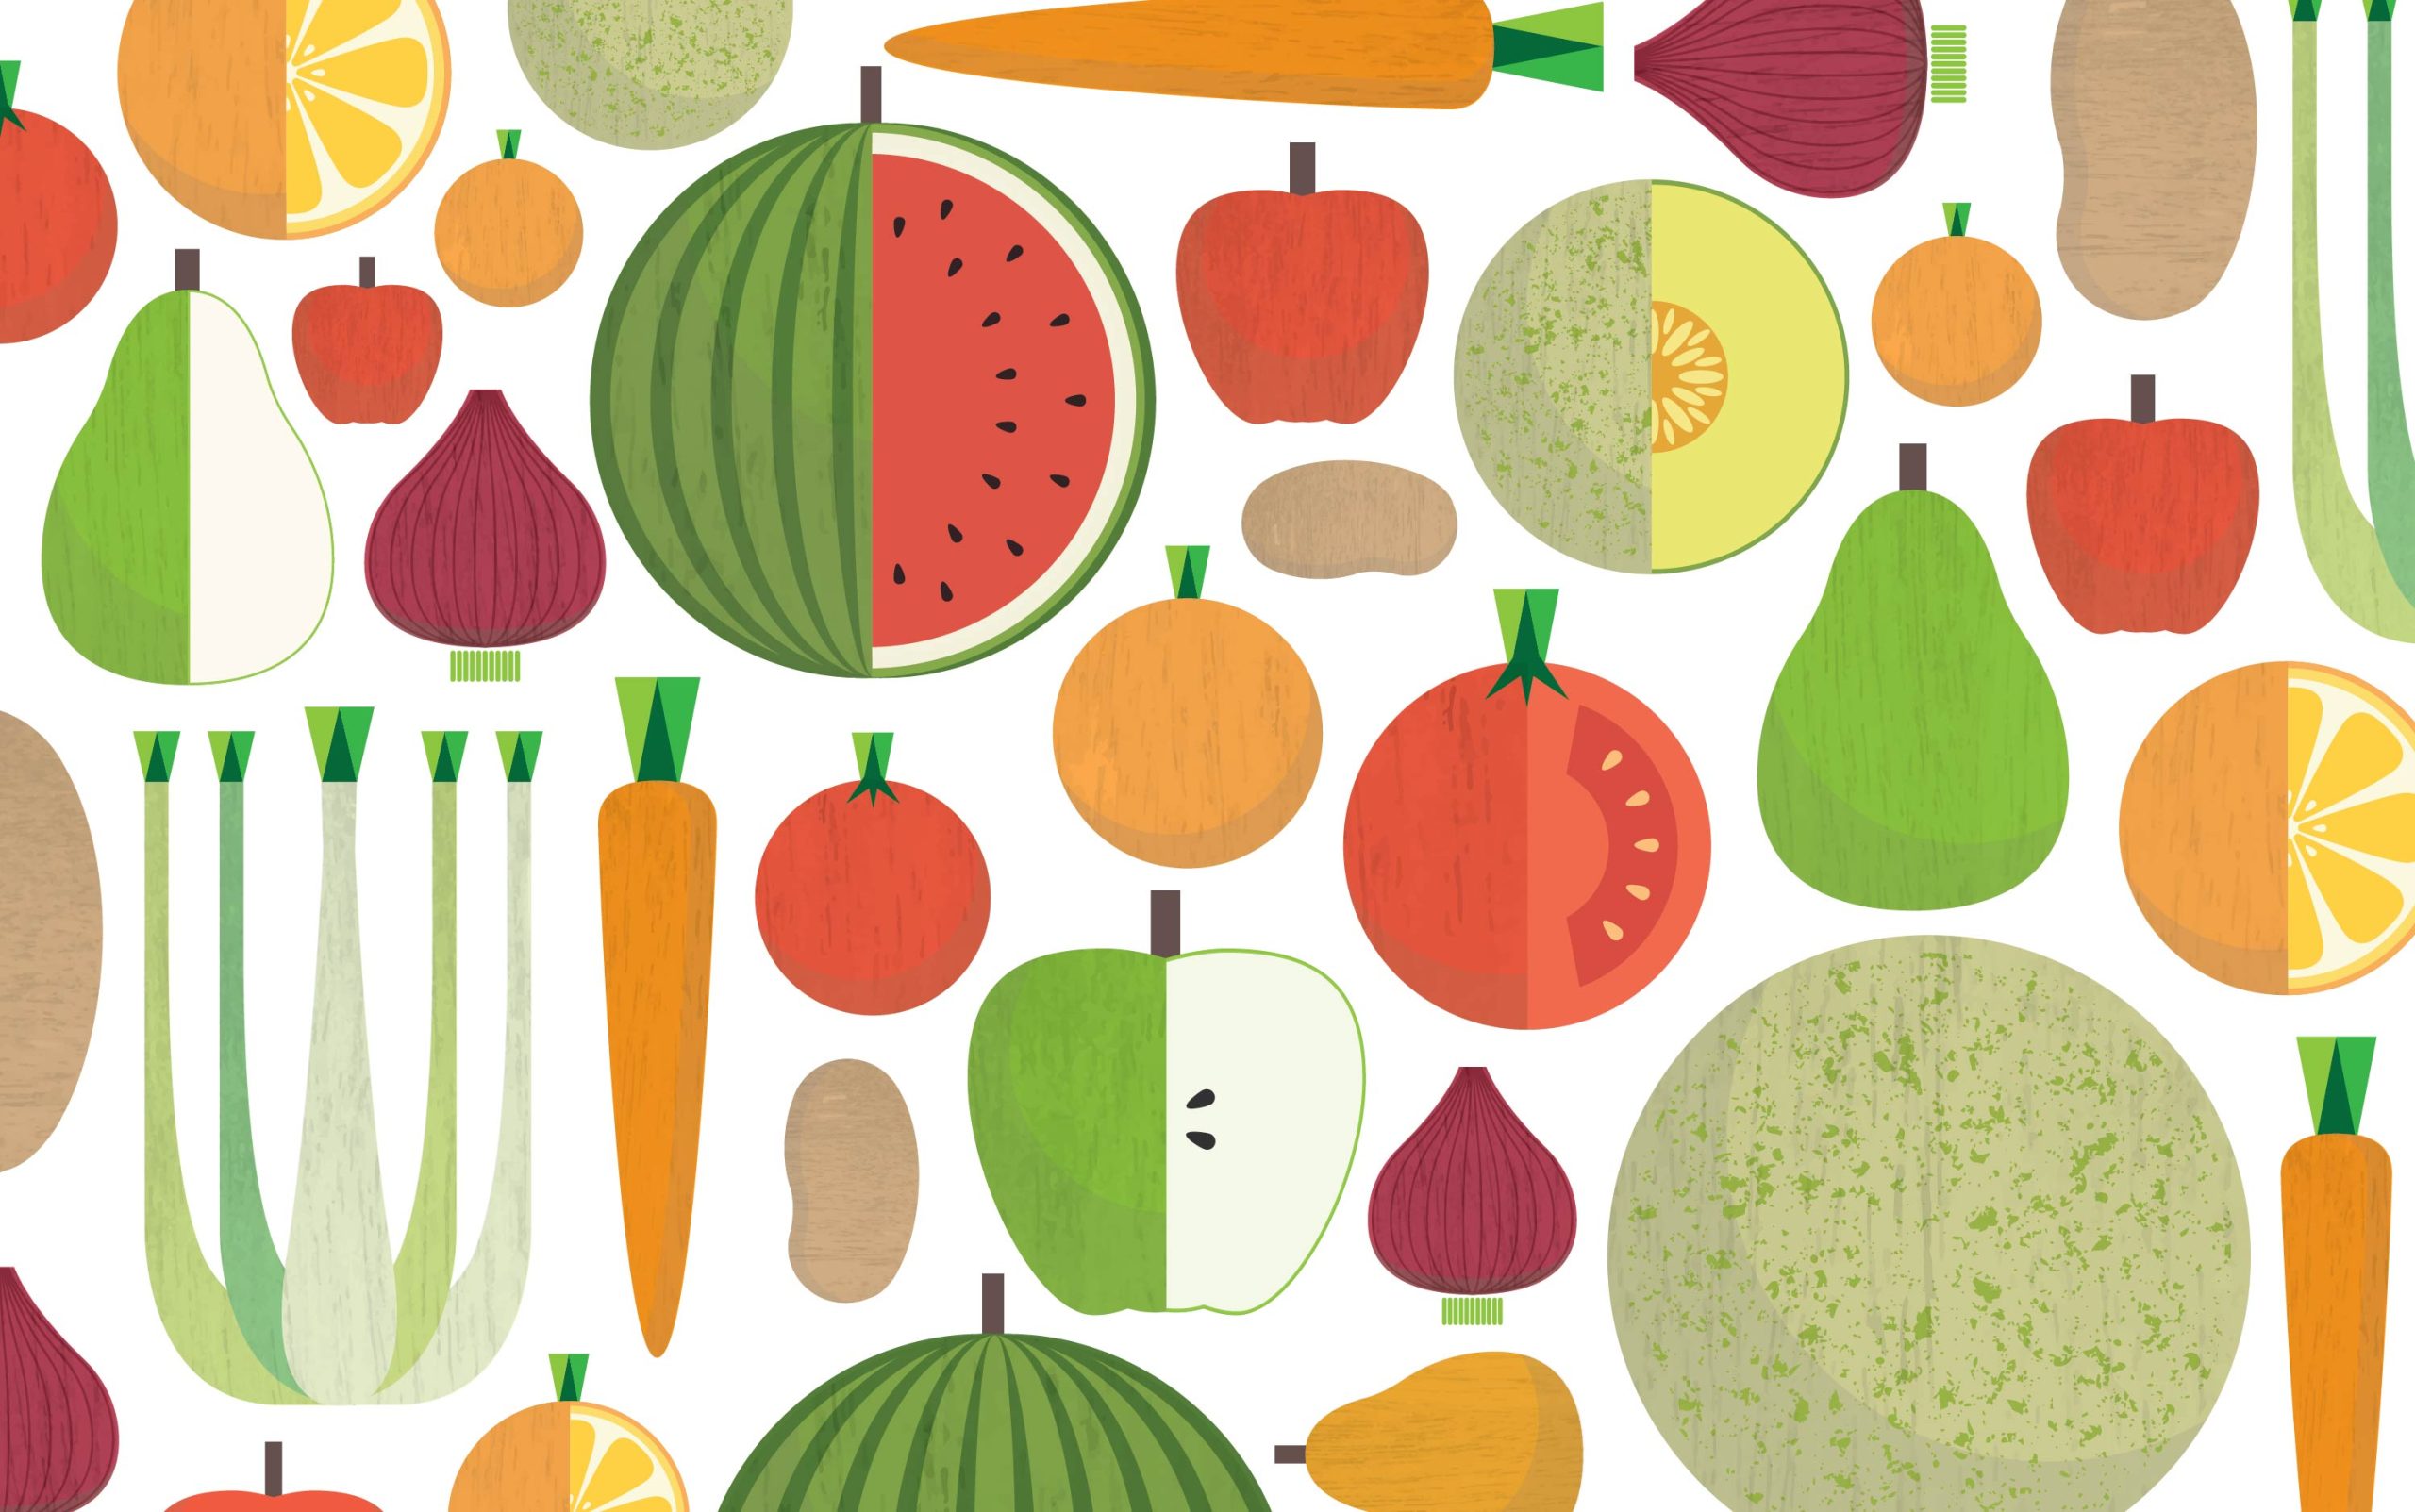 Fruit and vegetable illustrations for The Food Group